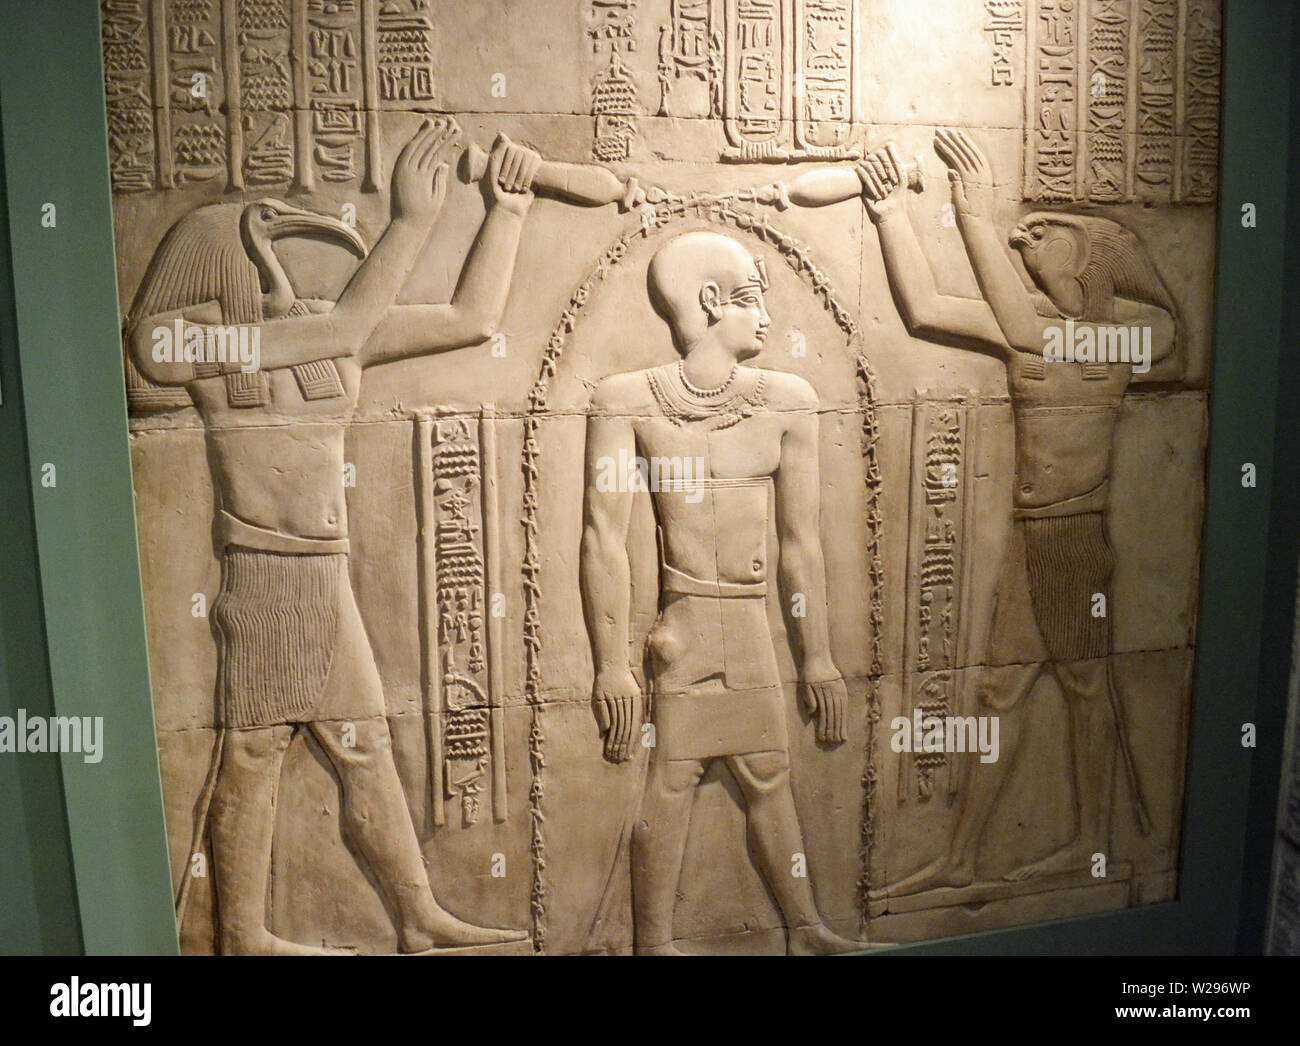 The Egyptian Gallery at Manchester Museum, UK. Part of the University of Manchester. Stock Photo